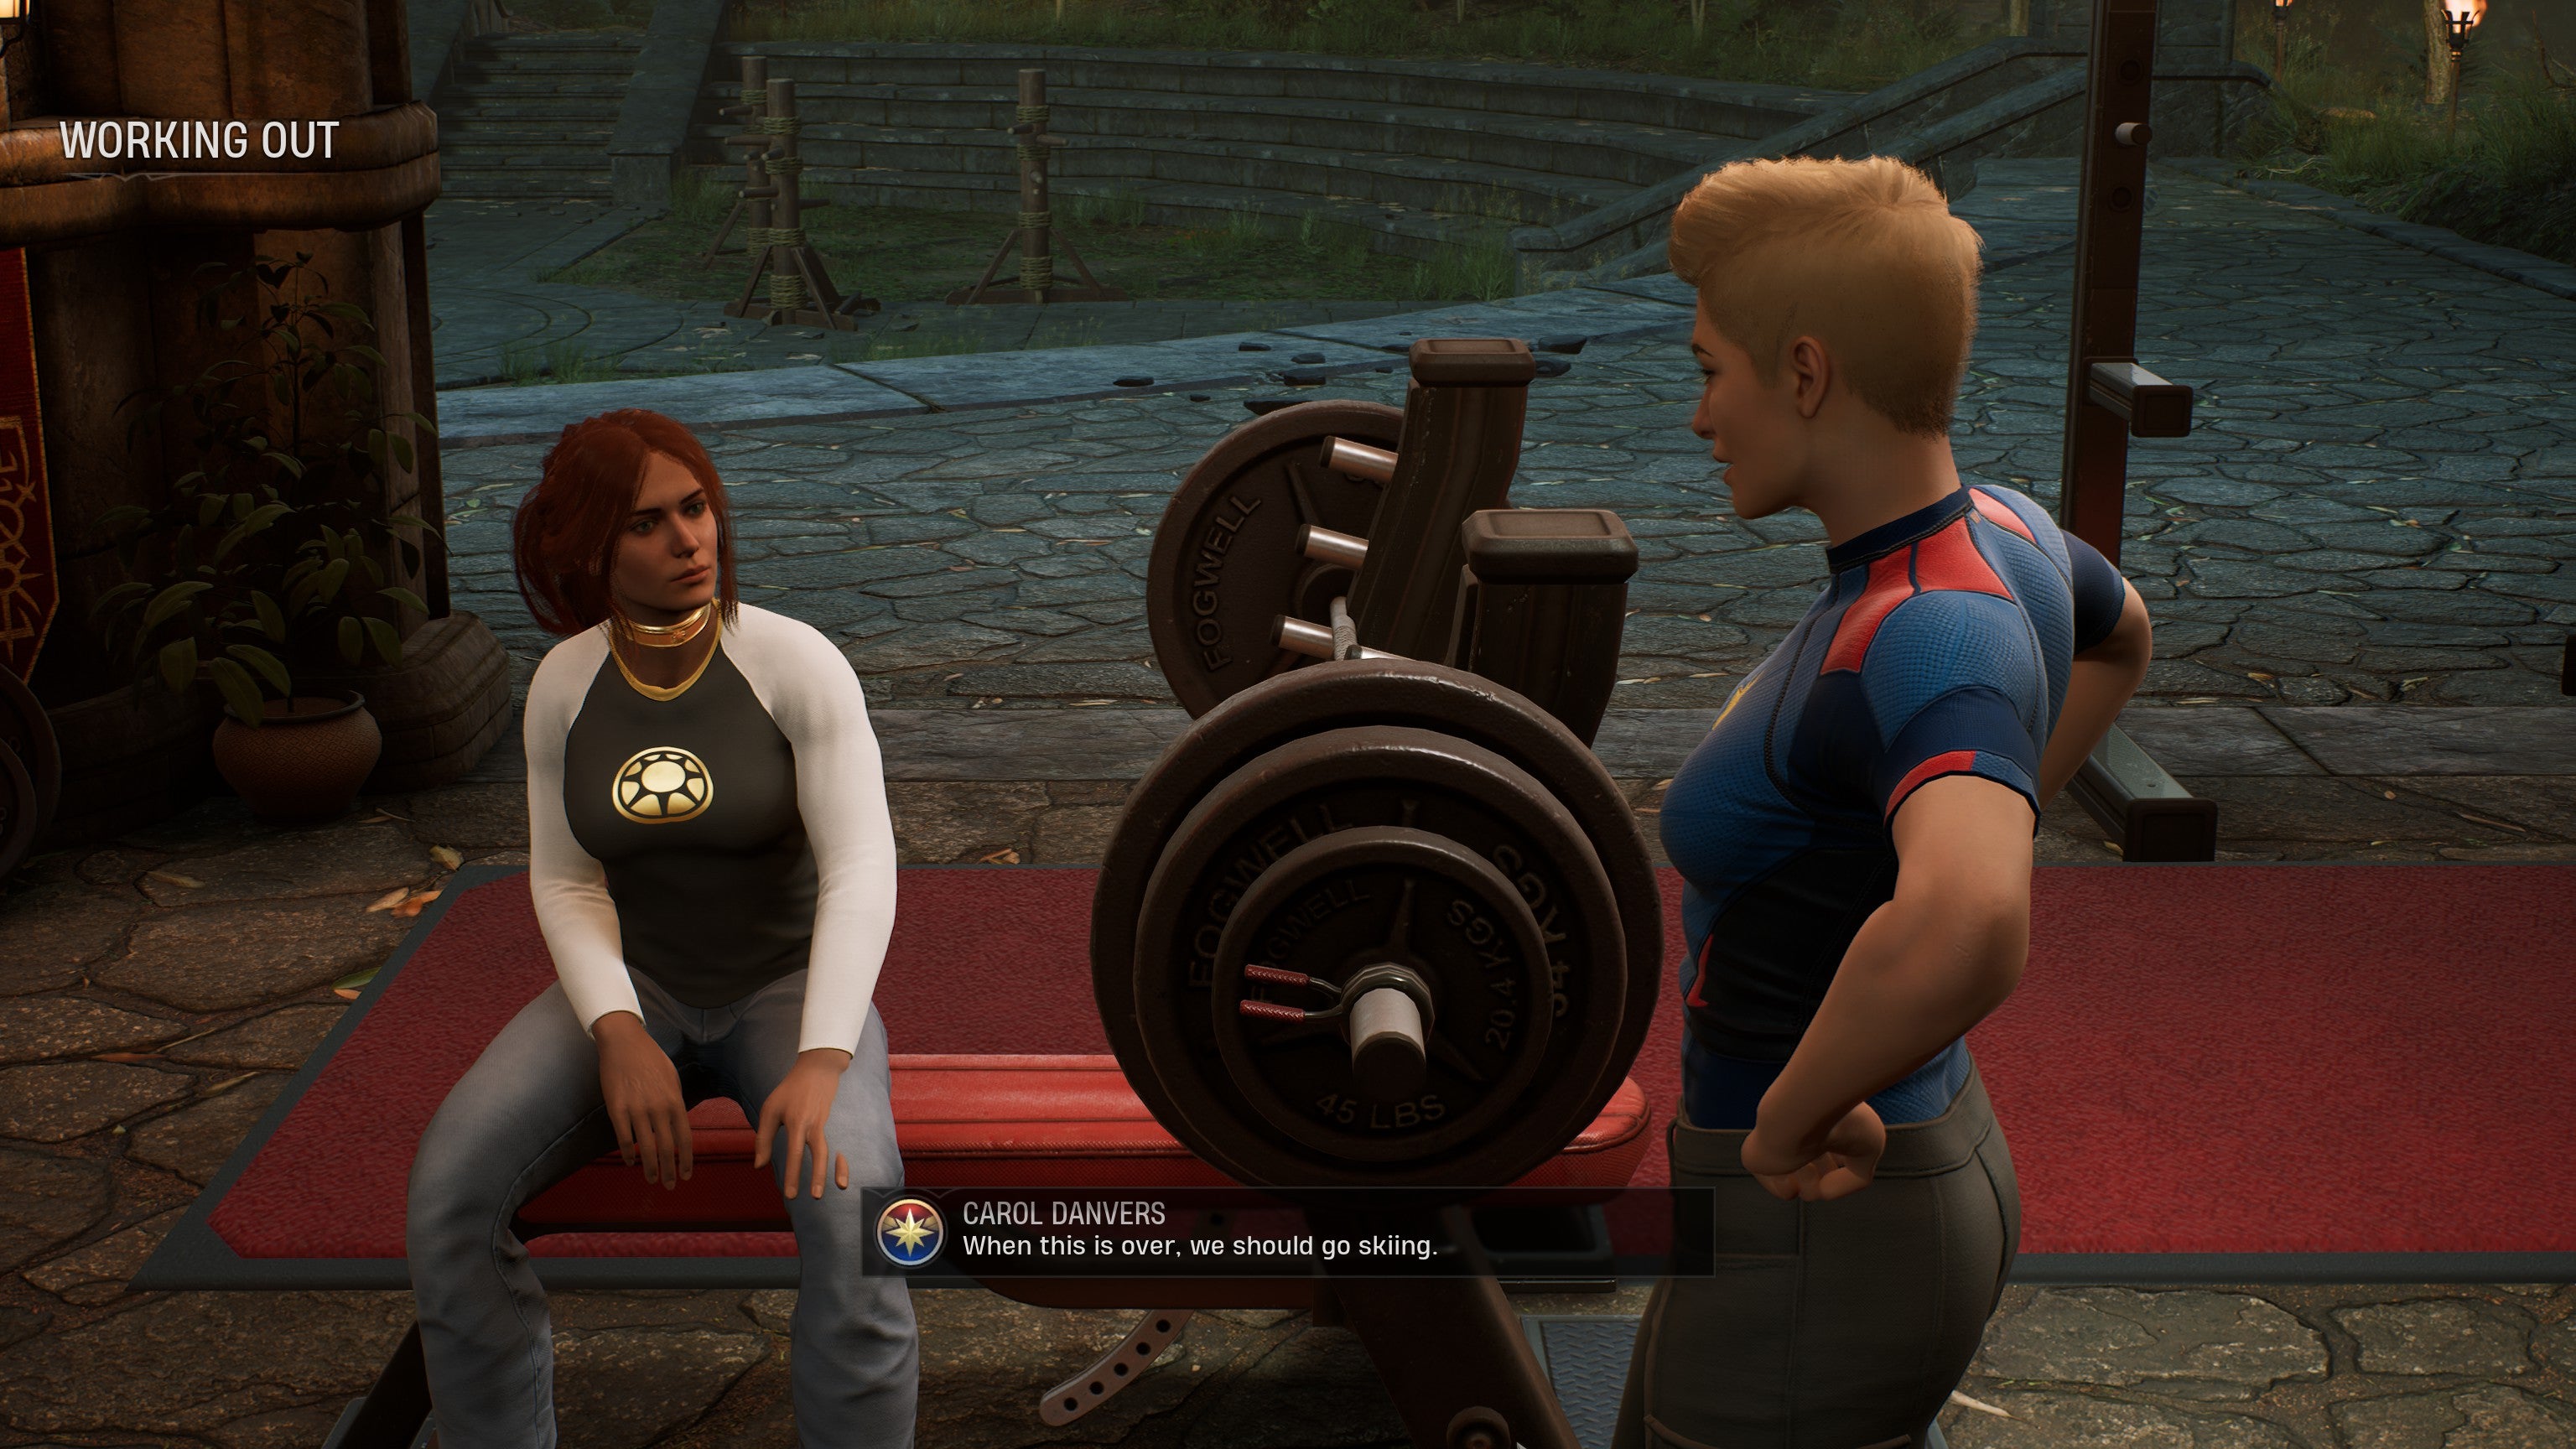 The Hunter works out with Captain Marvel in Marvel's Midnight Suns